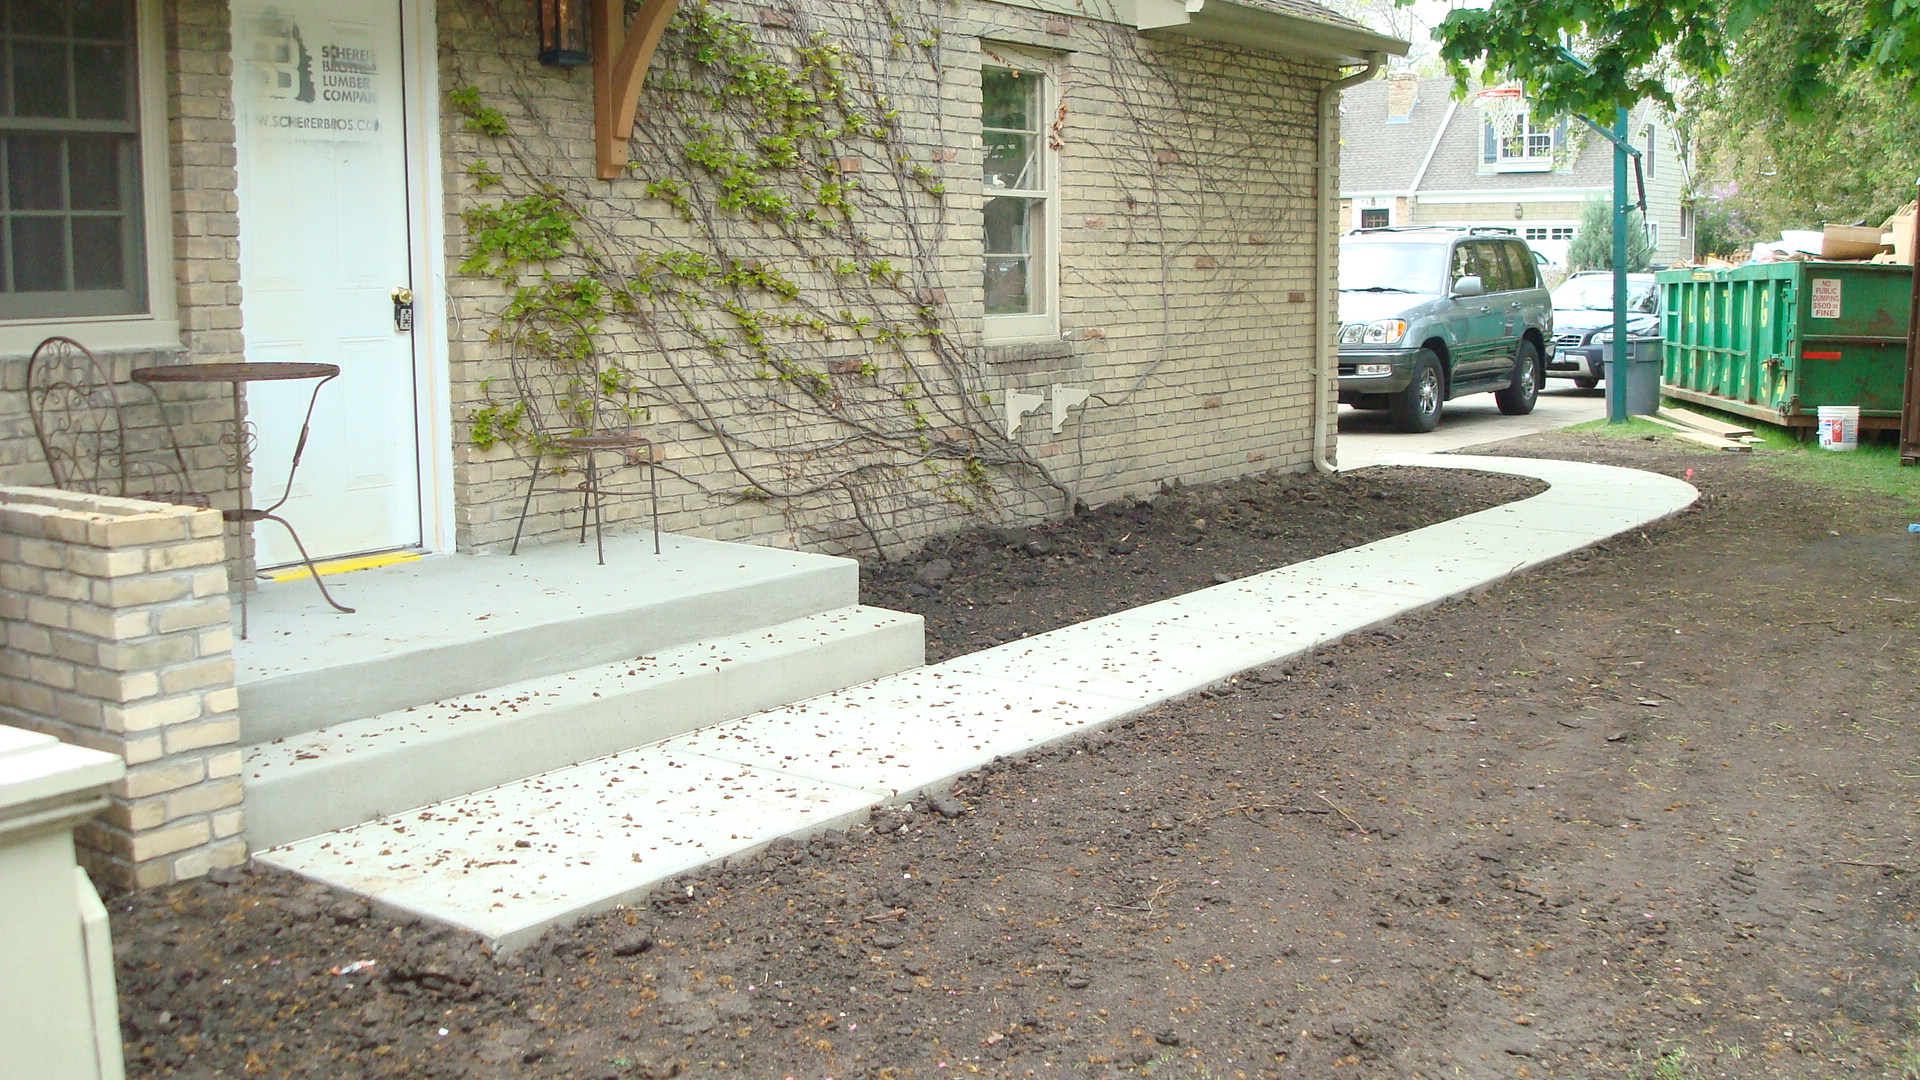 Residential and Commercial flatwork pouring and blockwork masonry services from Voehl Construction Inc.